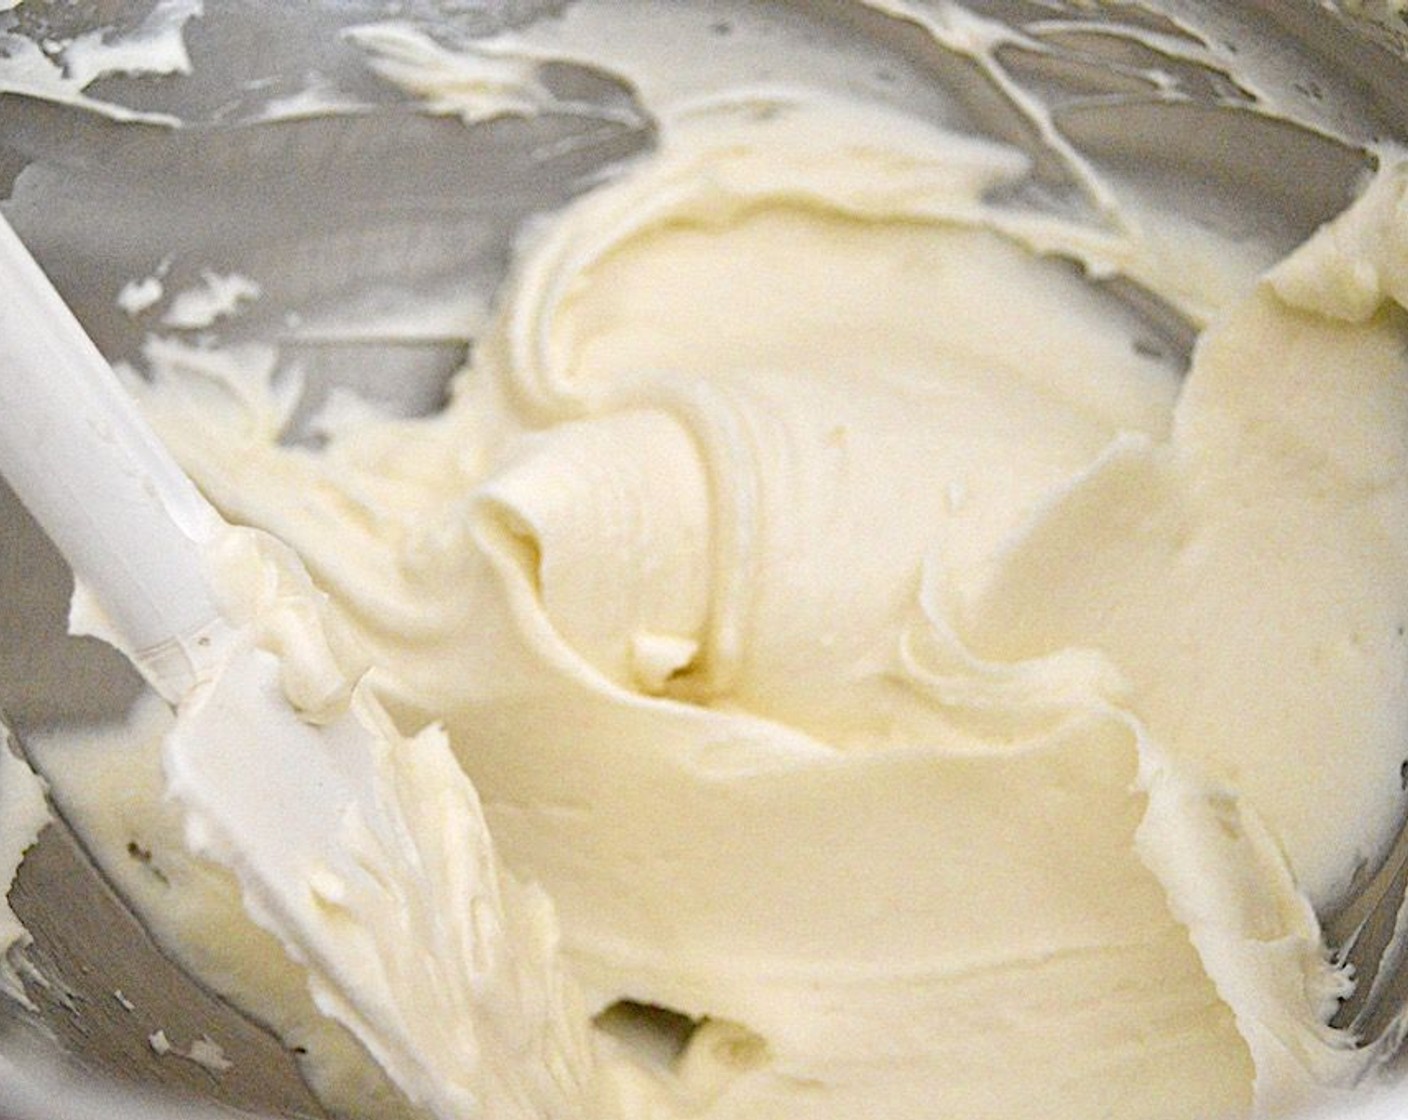 step 7 Combine the Philadelphia Original Soft Cheese (1 cup) and Unsalted Butter (1/2 cup) in the mixer bowl. Beat them together thoroughly, then turn the speed to low and slowly add the Powdered Confectioners Sugar (3 3/4 cups) and Vanilla Extract (1 tsp) until you have a rich, smooth frosting.